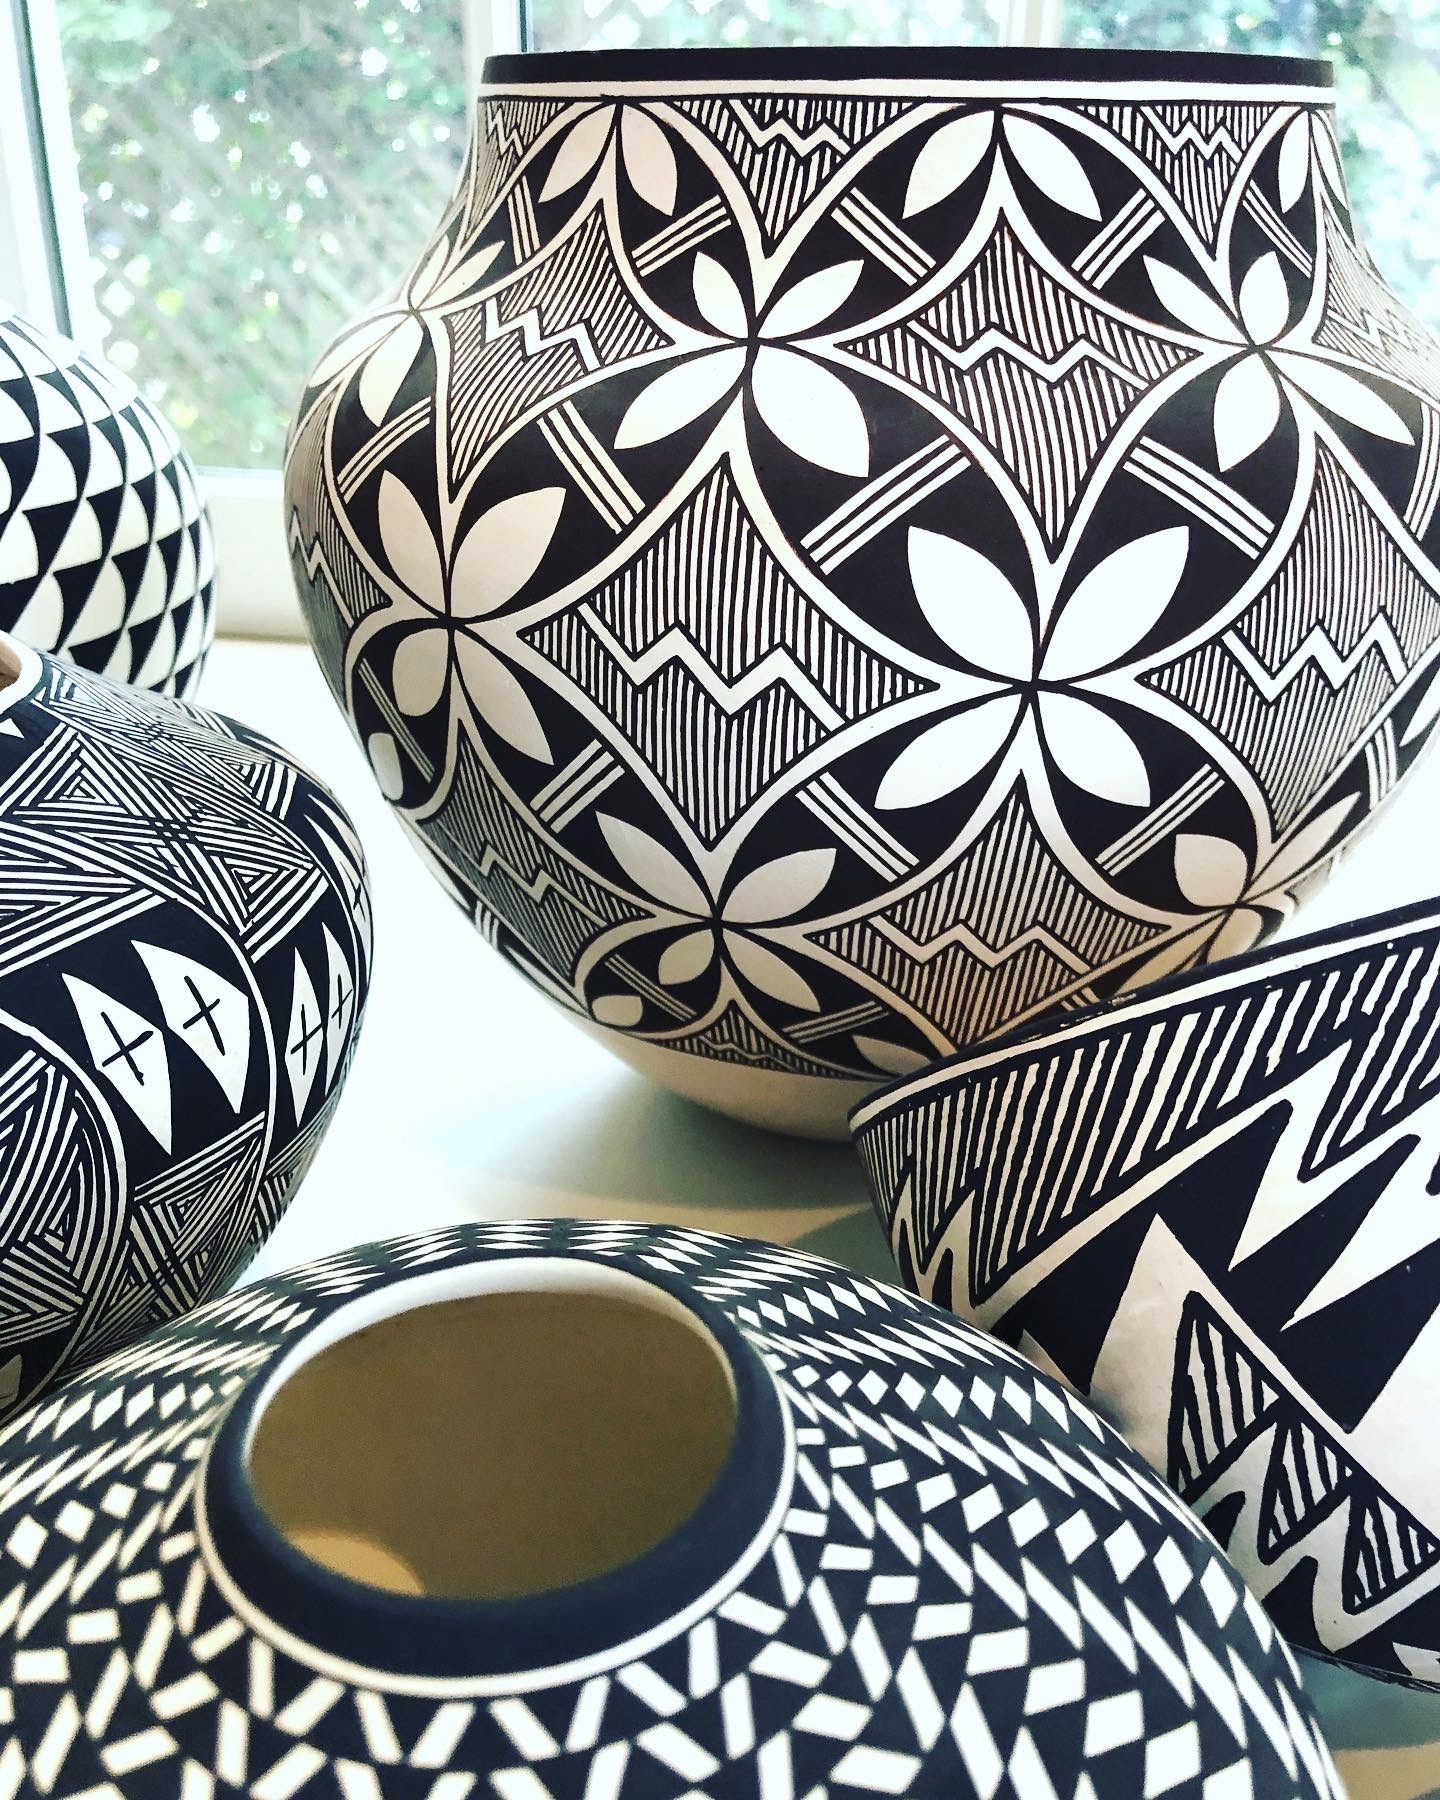 Andrea Fisher Fine Pottery is one of the best places to shop in Santa Fe